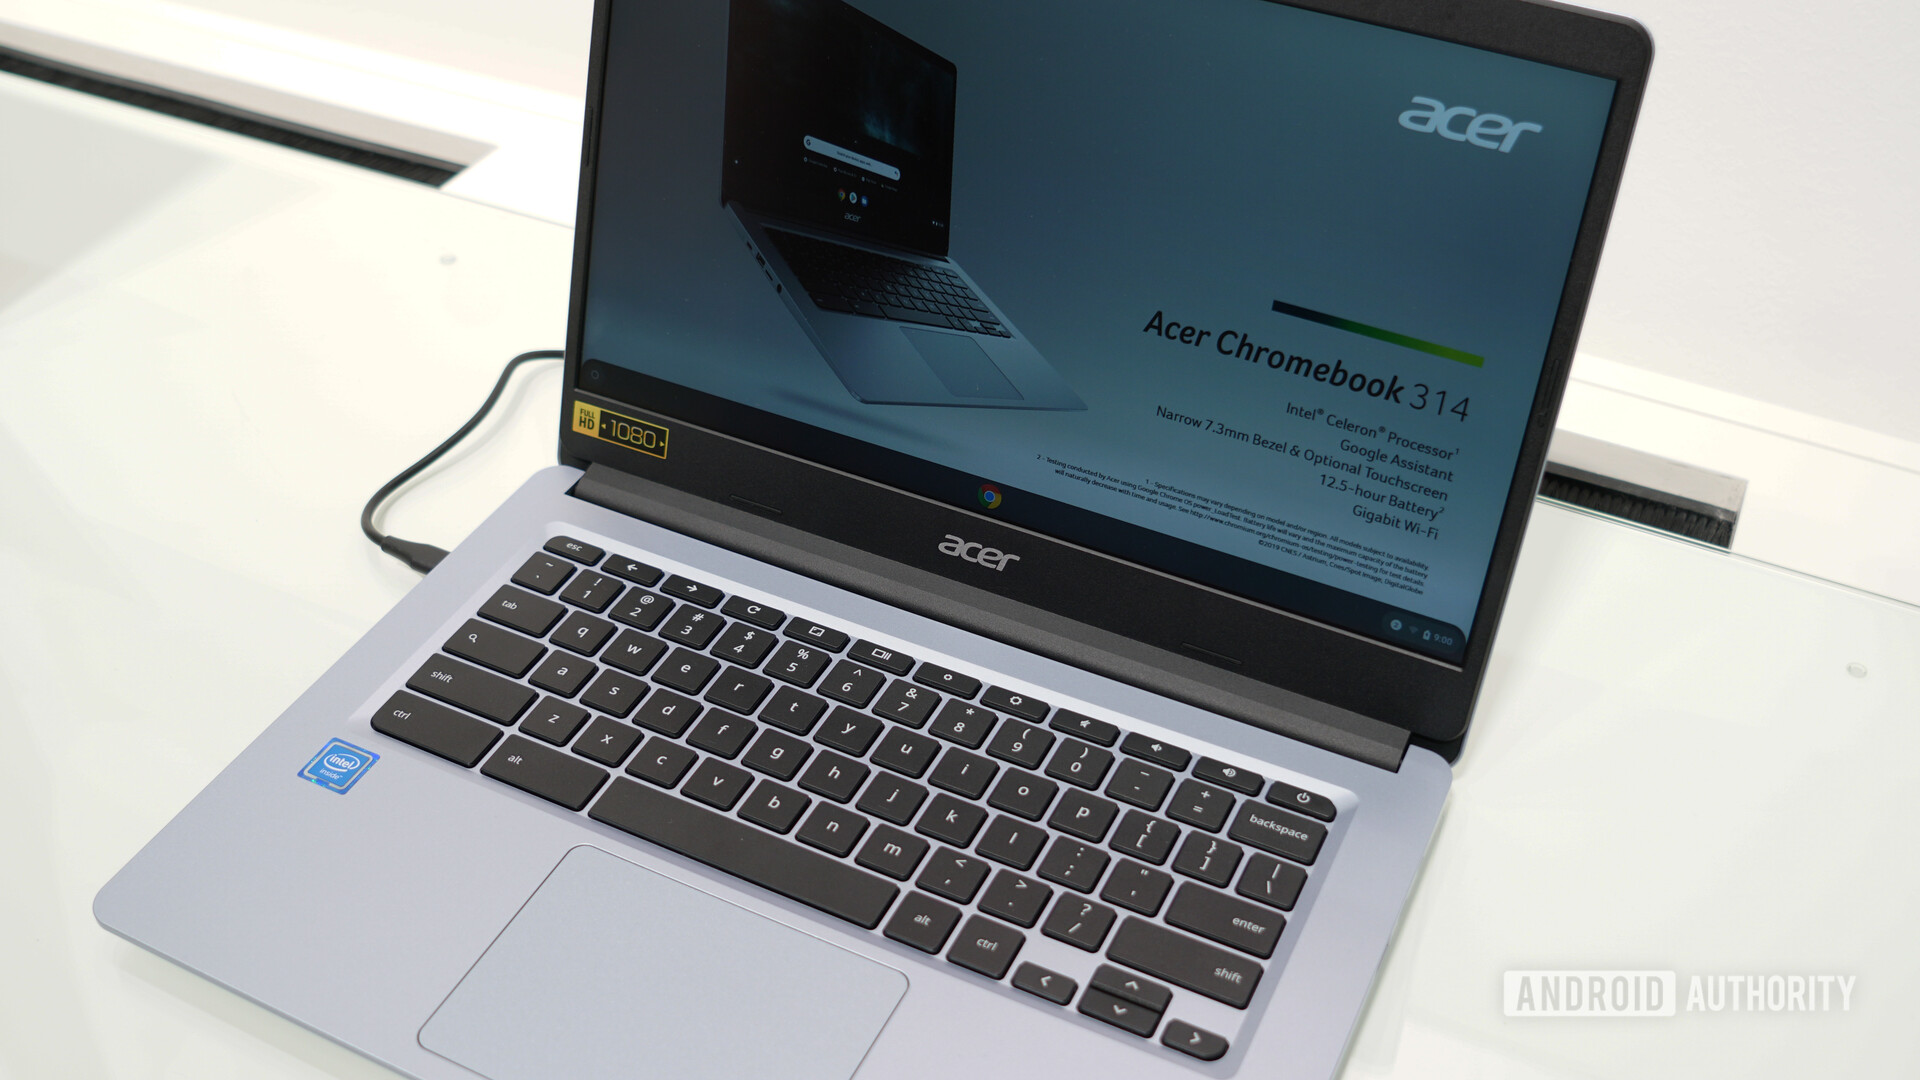 Acer Chromebook 314 display and keyboard